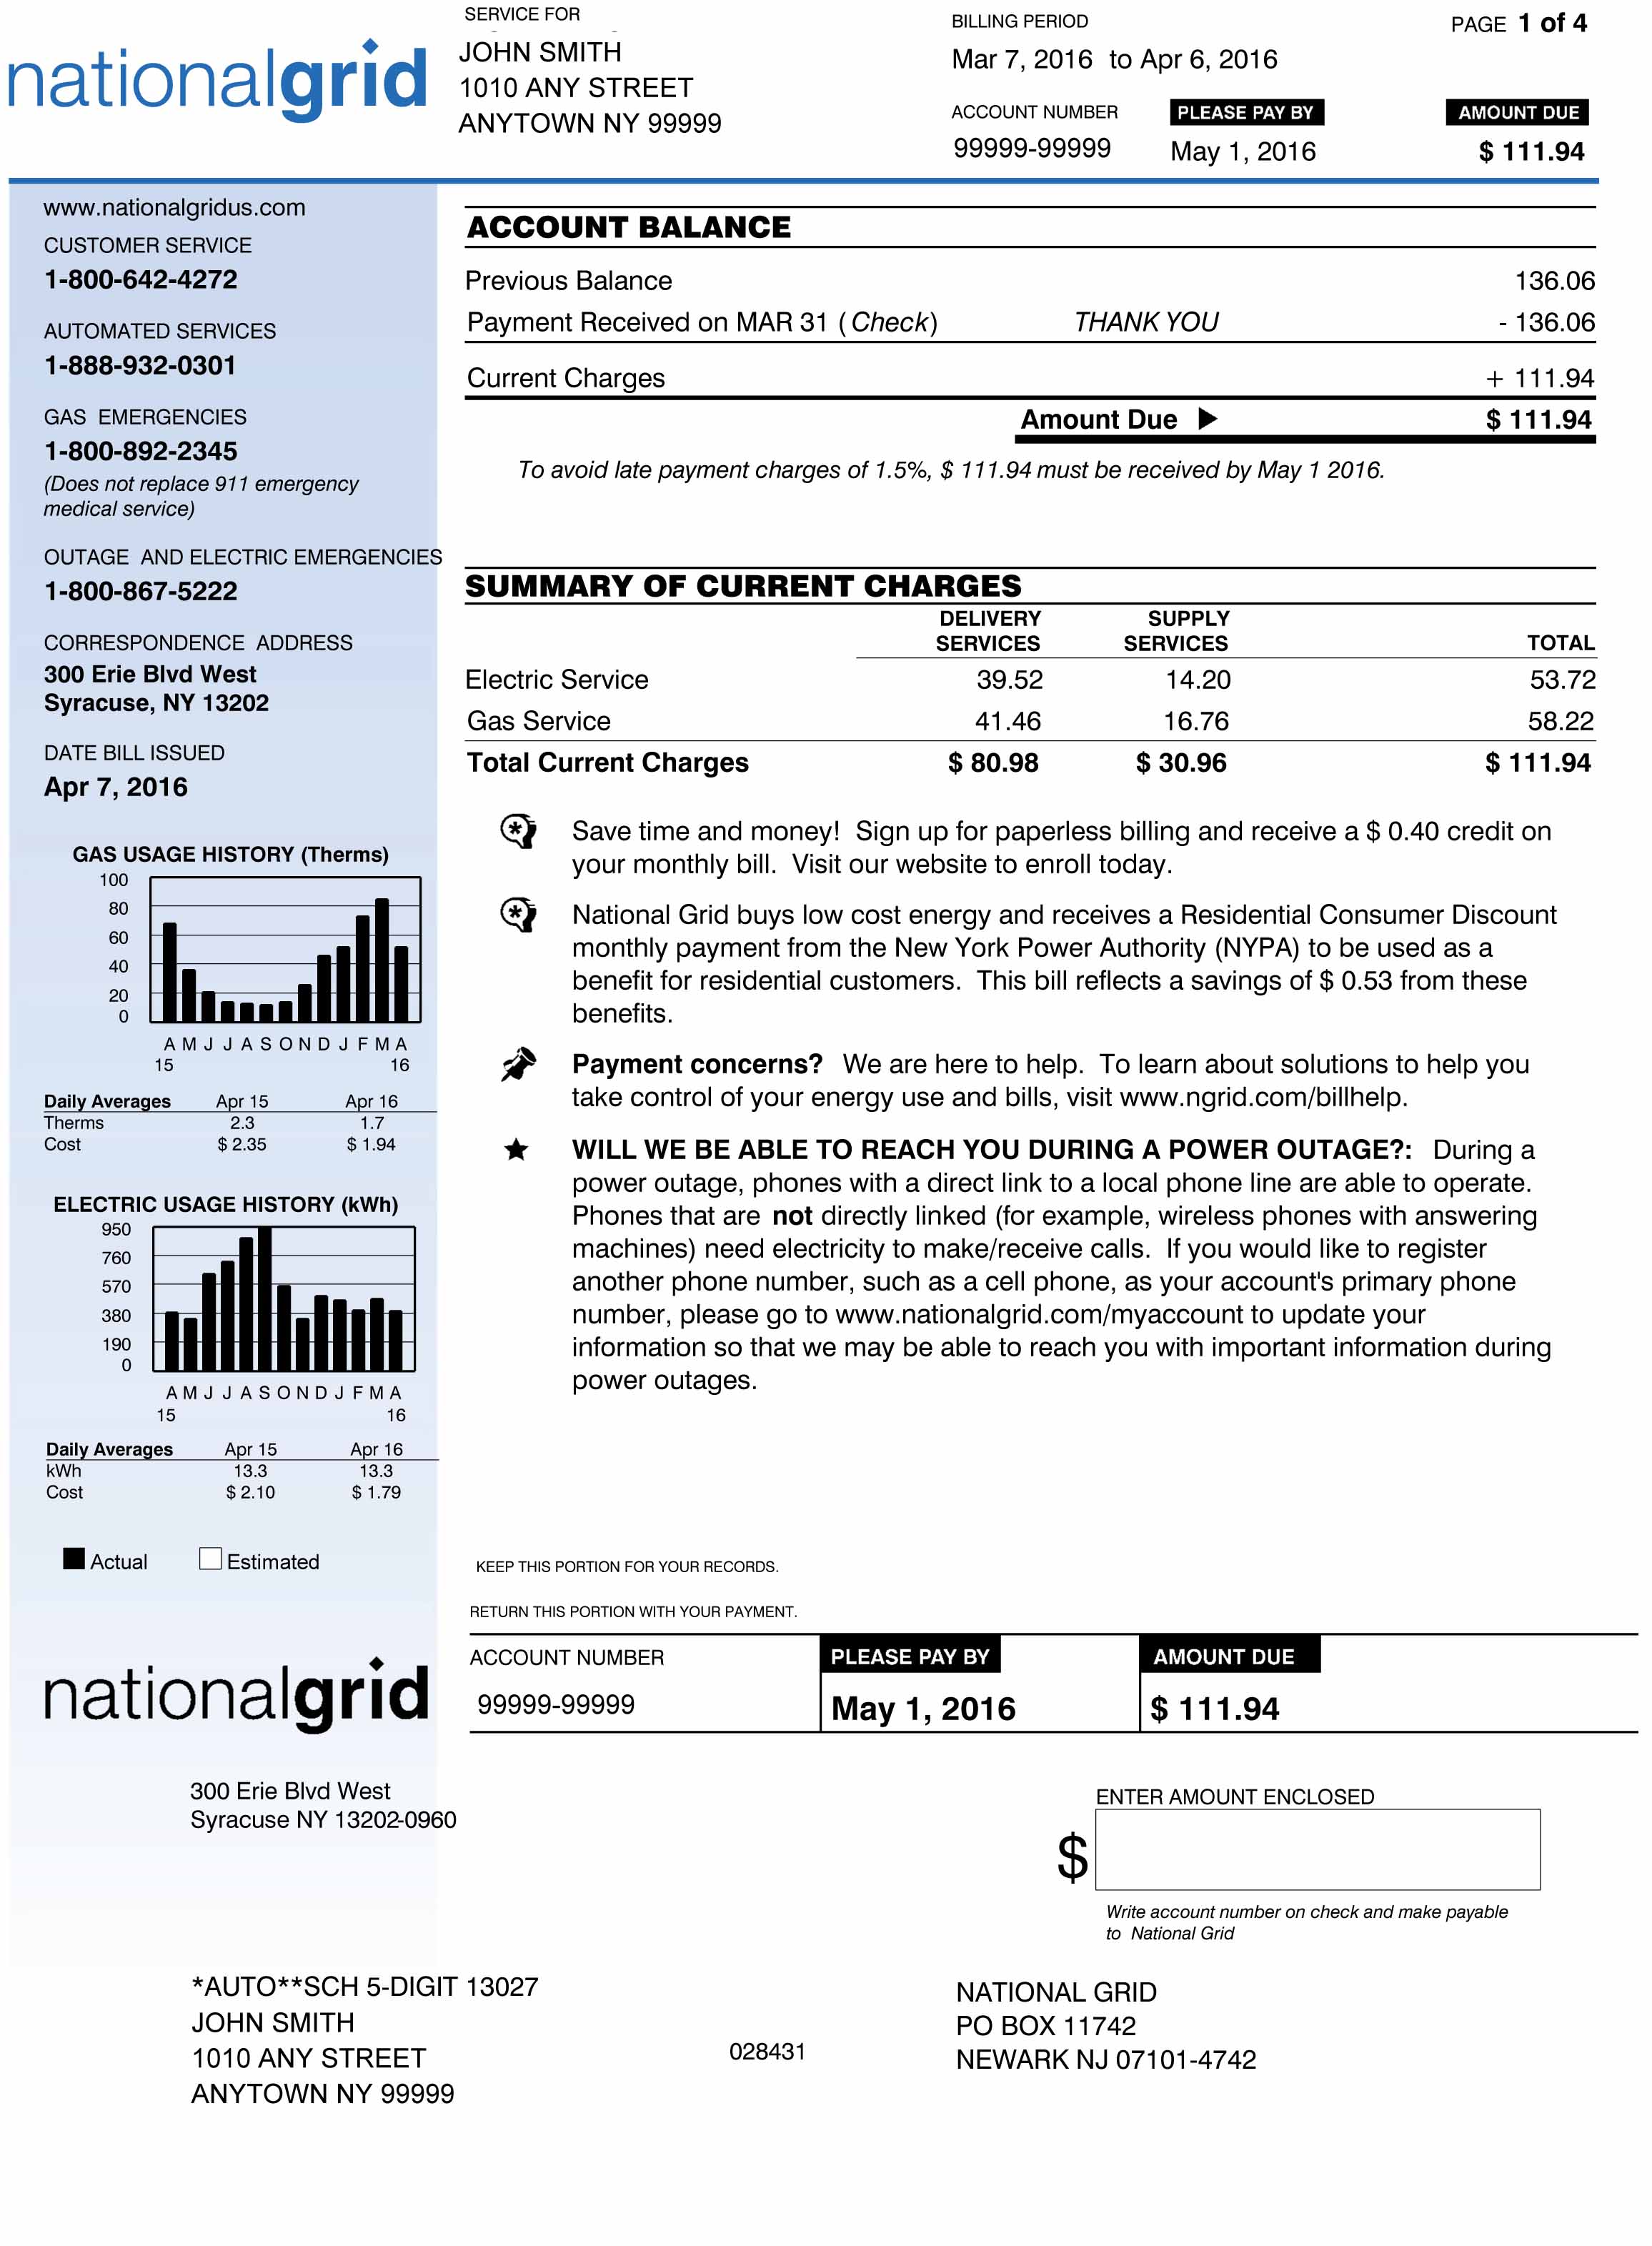 National grid contact